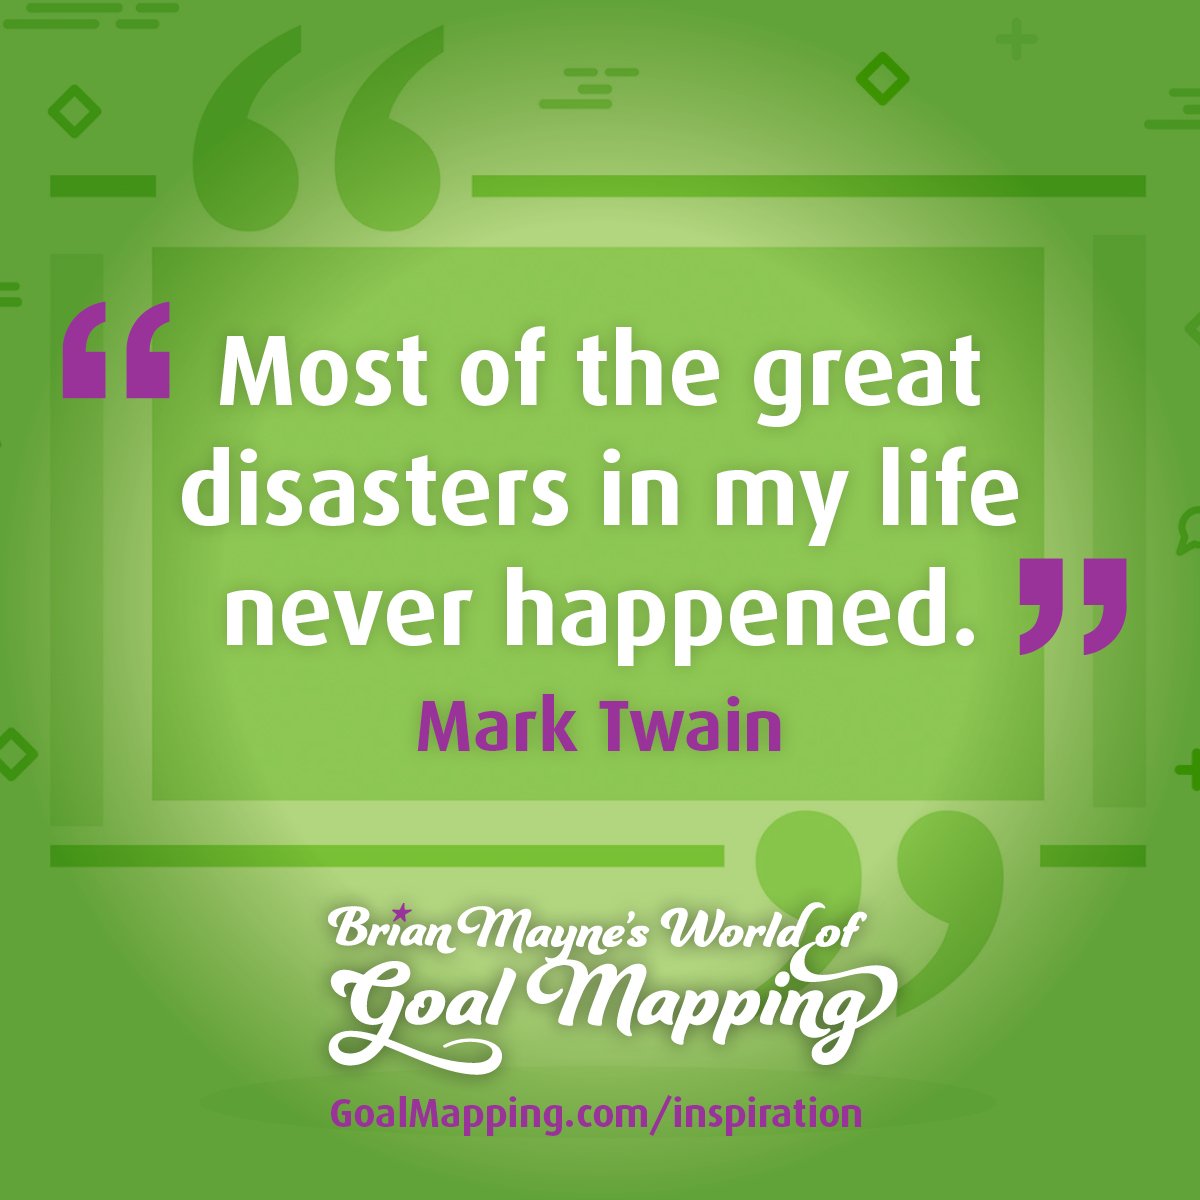 "Most of the great disasters in my life never happened." Mark Twain